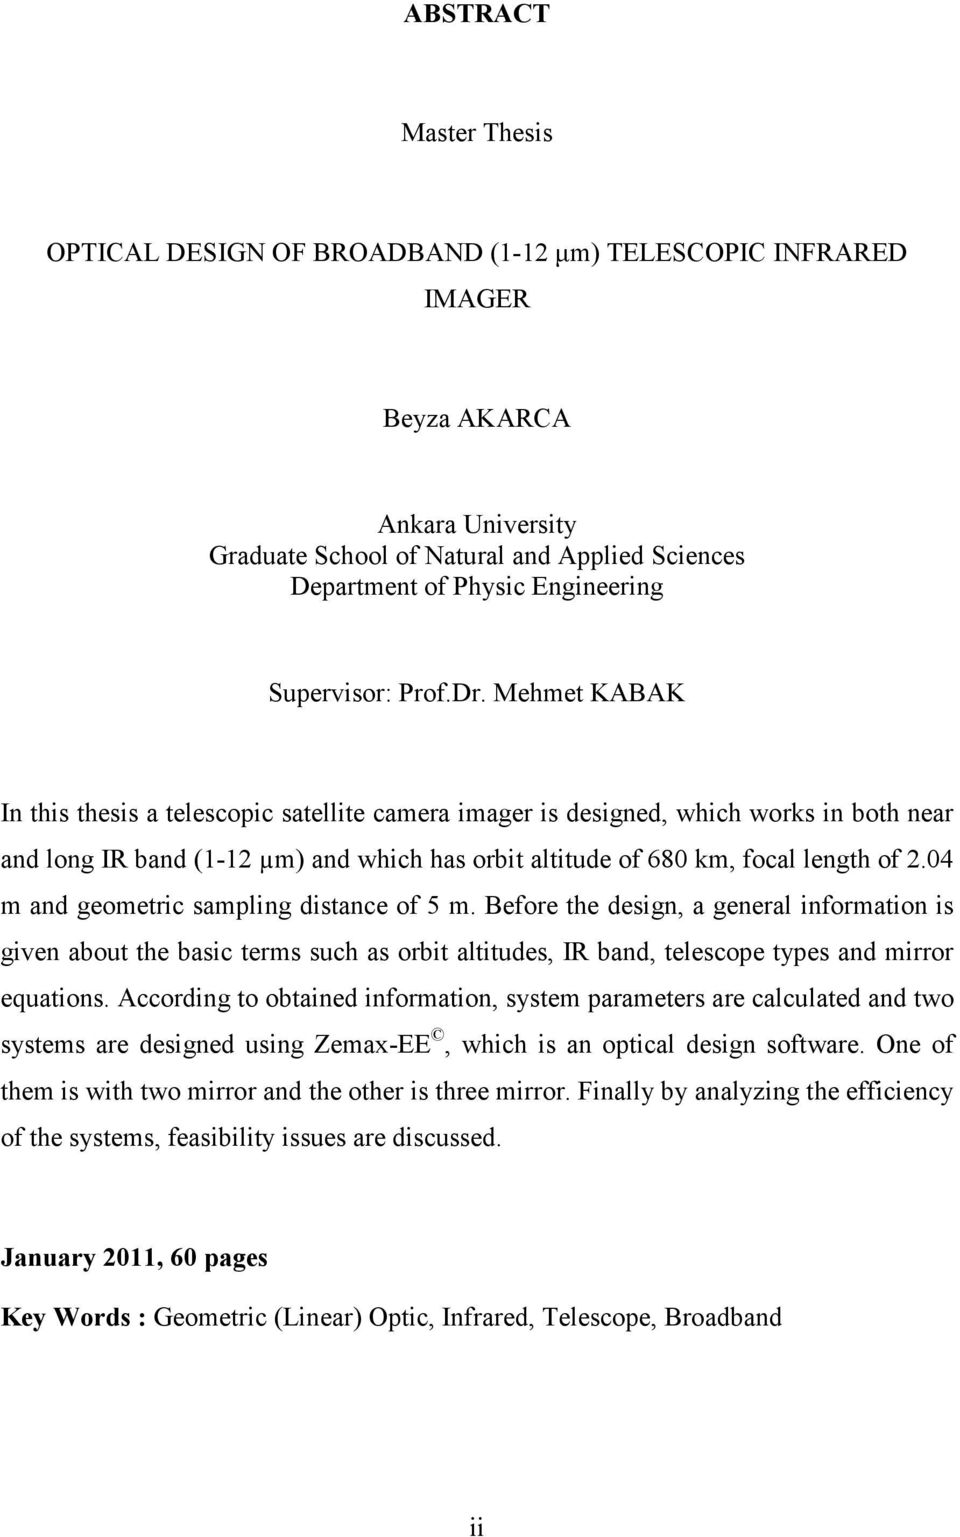 Mehmet KABAK In this thesis a telescopic satellite camera imager is designed, which works in both near and long IR band (1-12 µm) and which has orbit altitude of 680 km, focal length of 2.